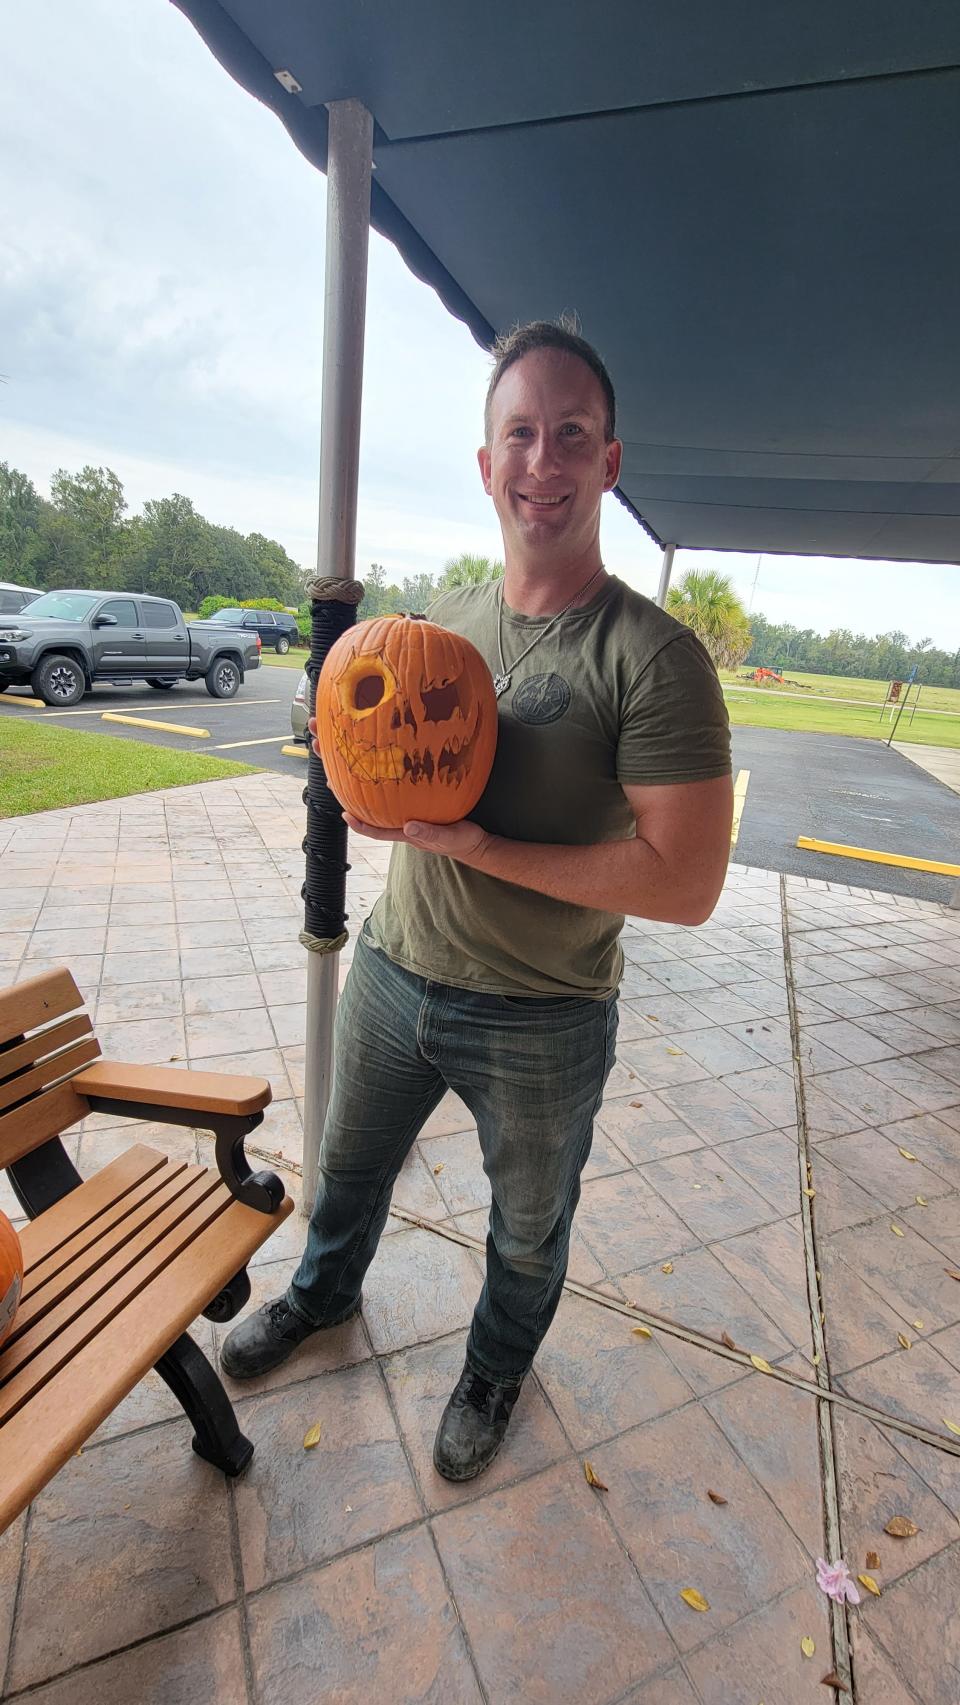 Horror fan Ian Eubanks is competing in national contest Face of Horror. The winner gets $13,000 and a photo shoot with actor/stuntman Kane Hodder (Jason Voorhees in the Friday the 13th movies).